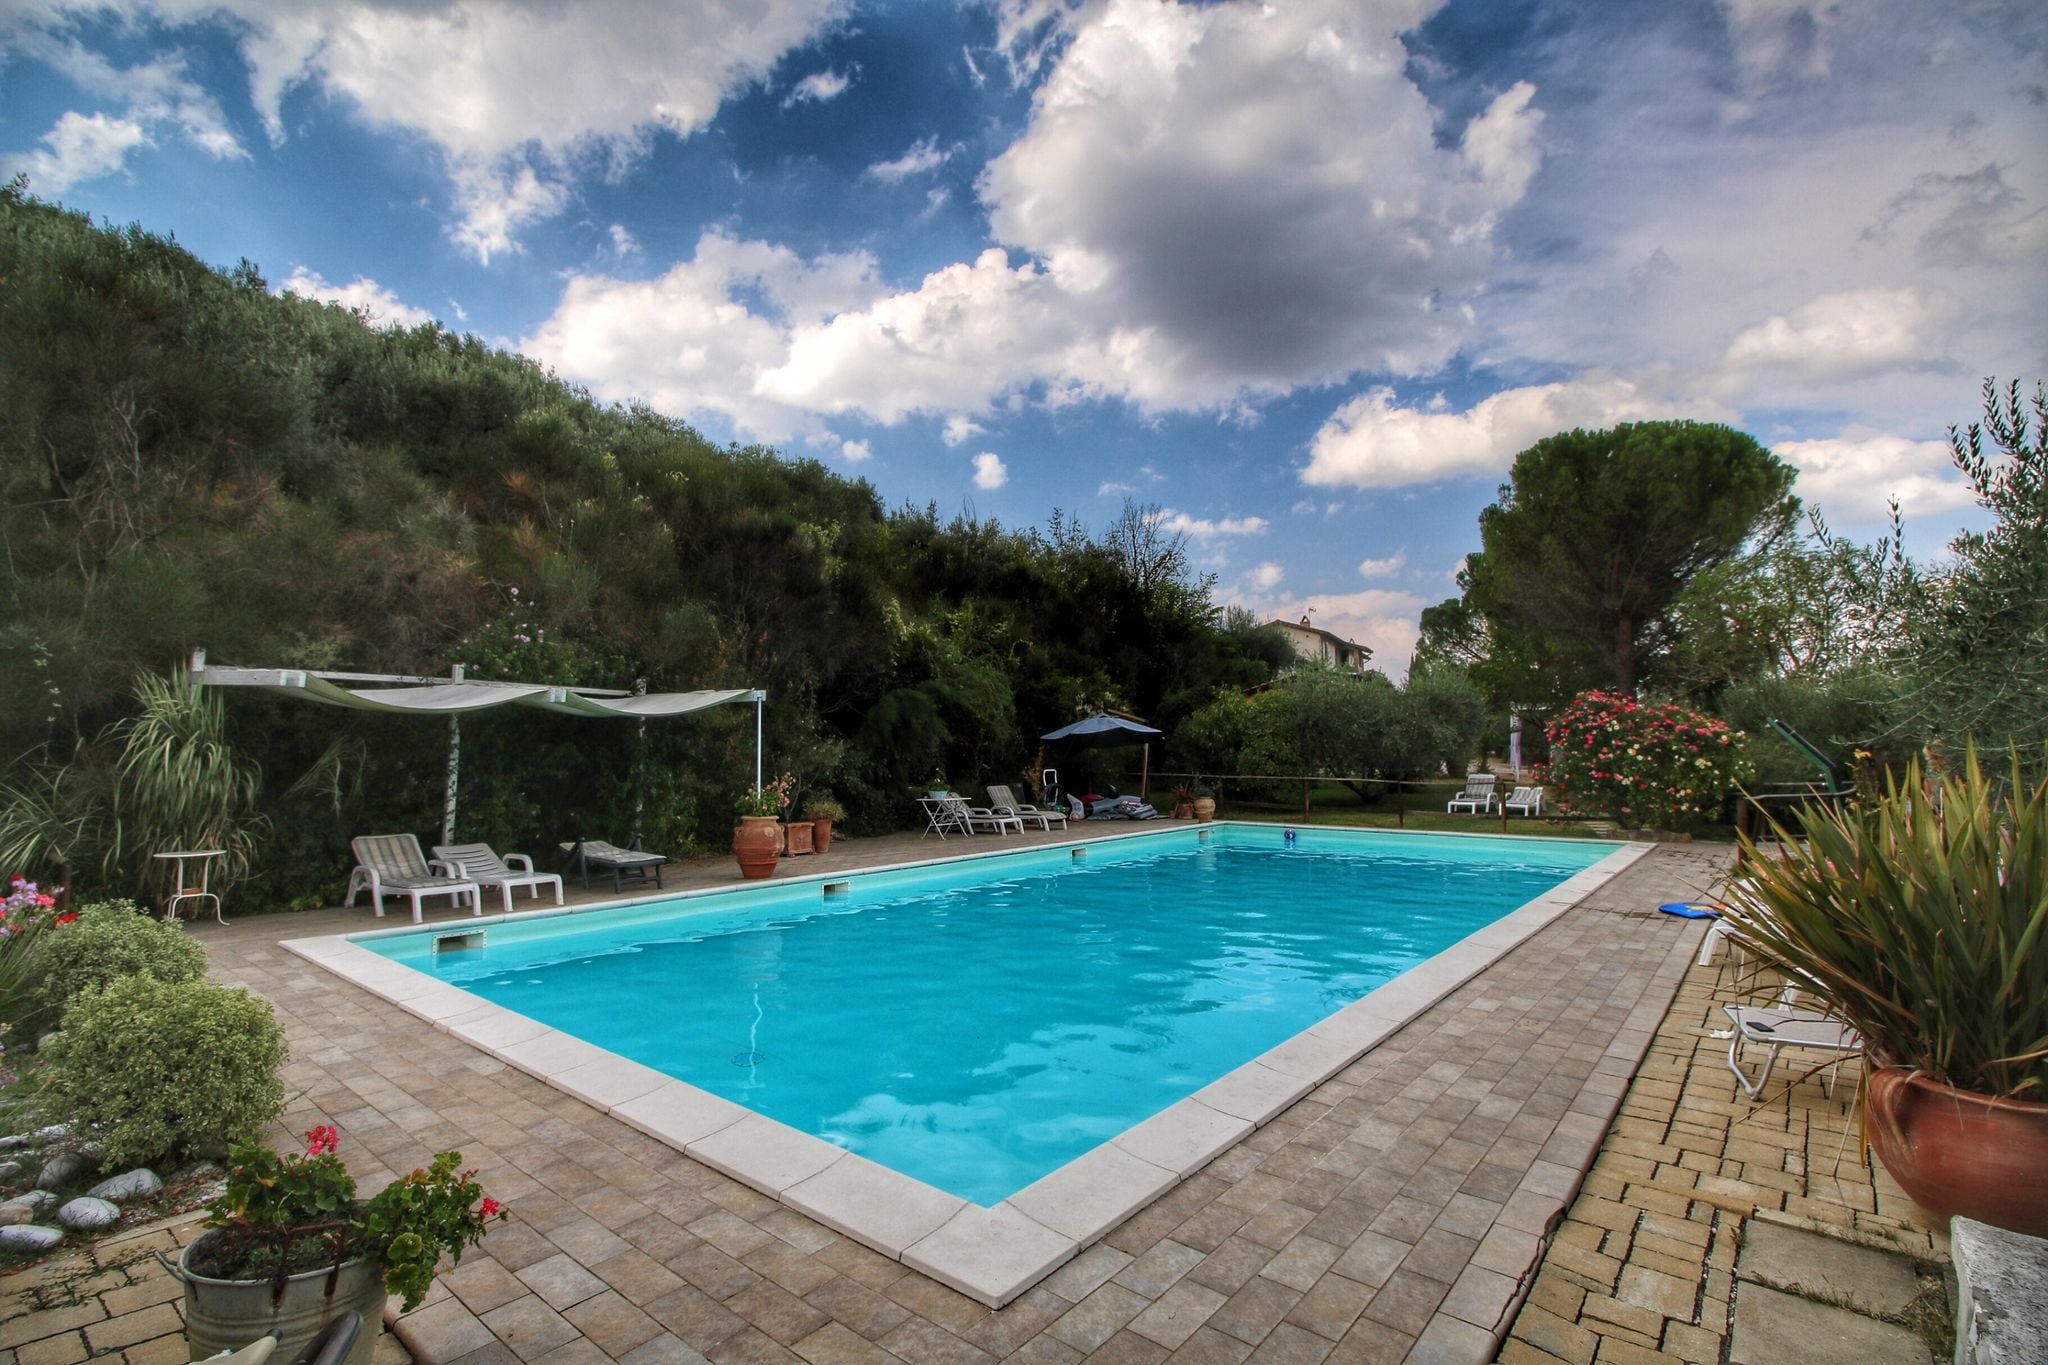 Country House with swimming pool, garden with Mediterranean plants, restaurant

